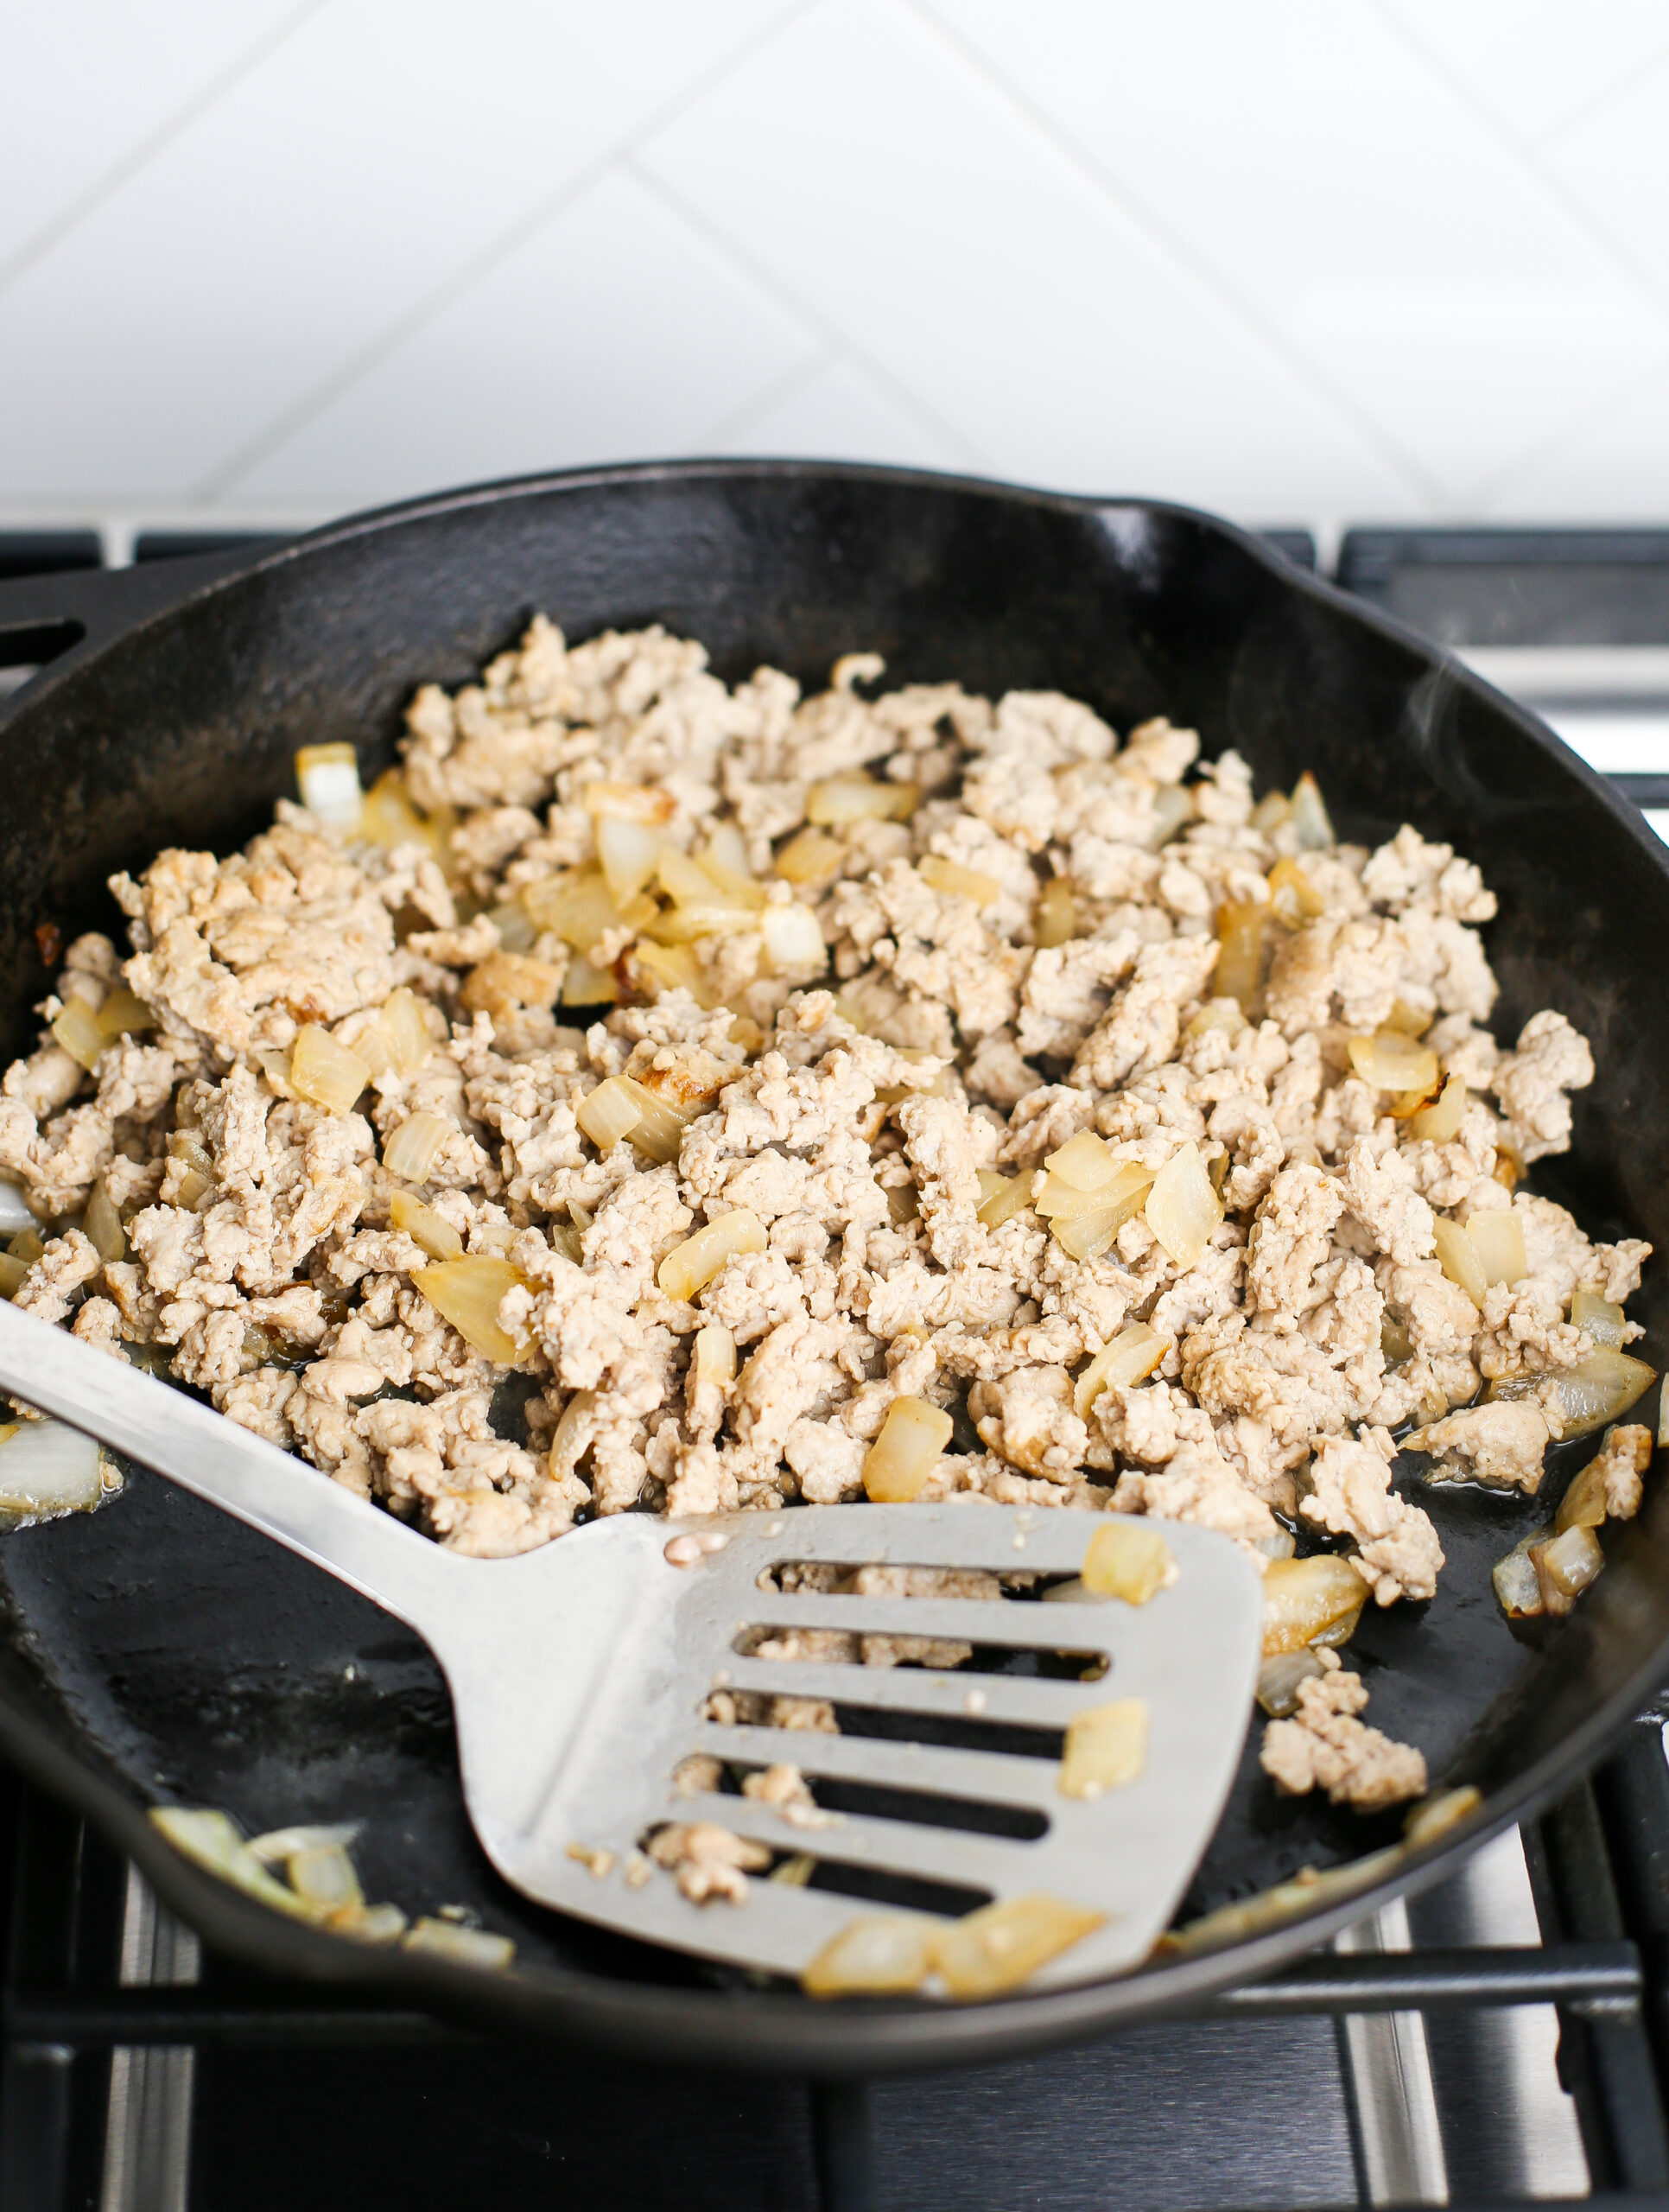 Cooked ground chicken and onions in a cast iron skillet.